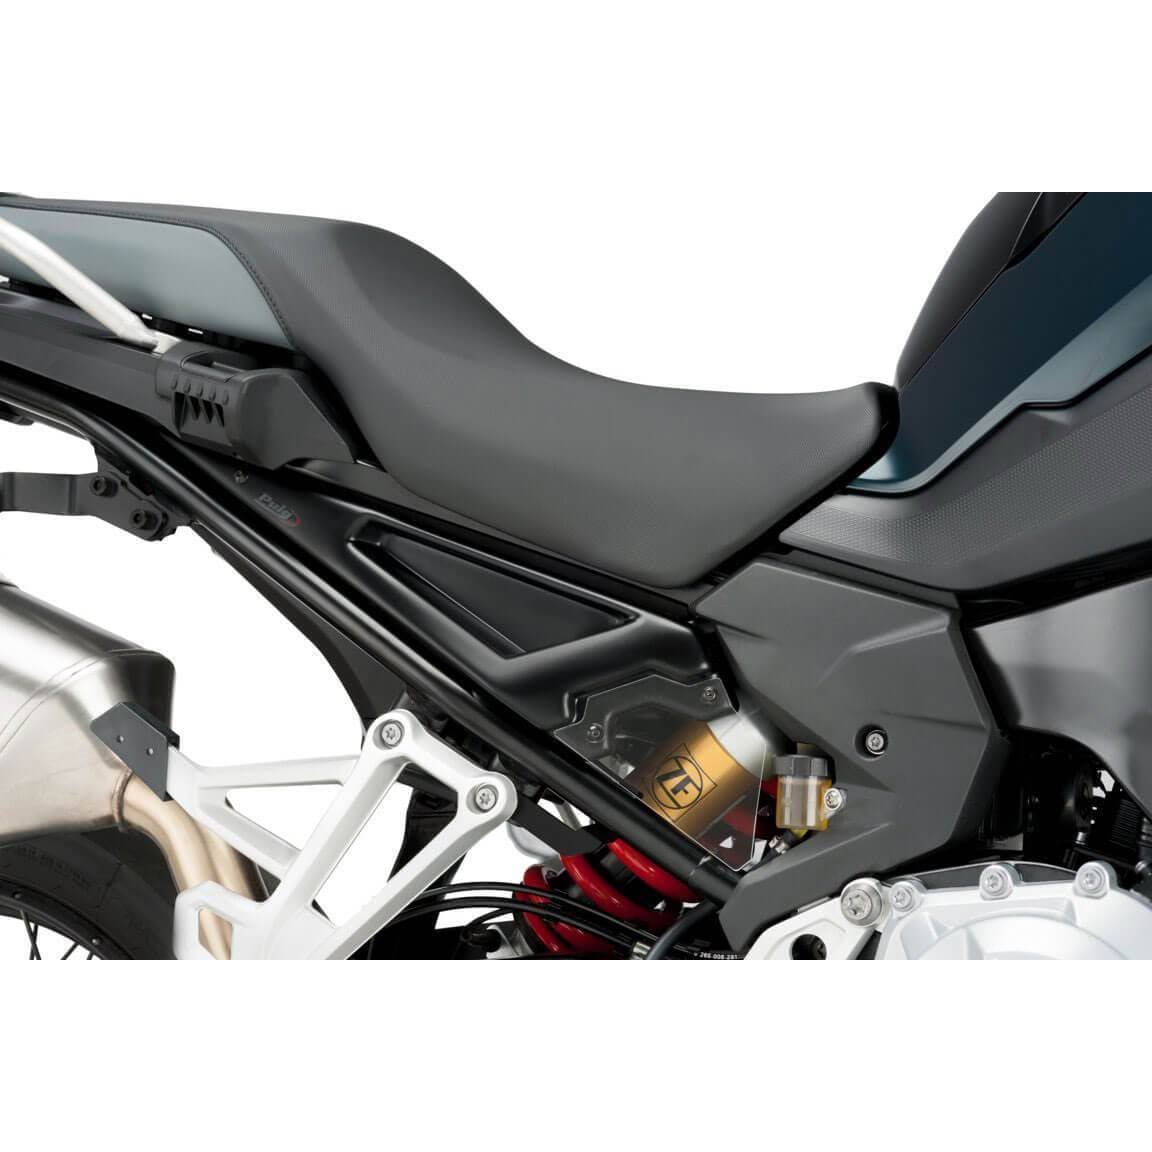 Puig Infill Panels | Black | BMW F850 GS 2018>Current-M9791J-Infill Panels-Pyramid Motorcycle Accessories